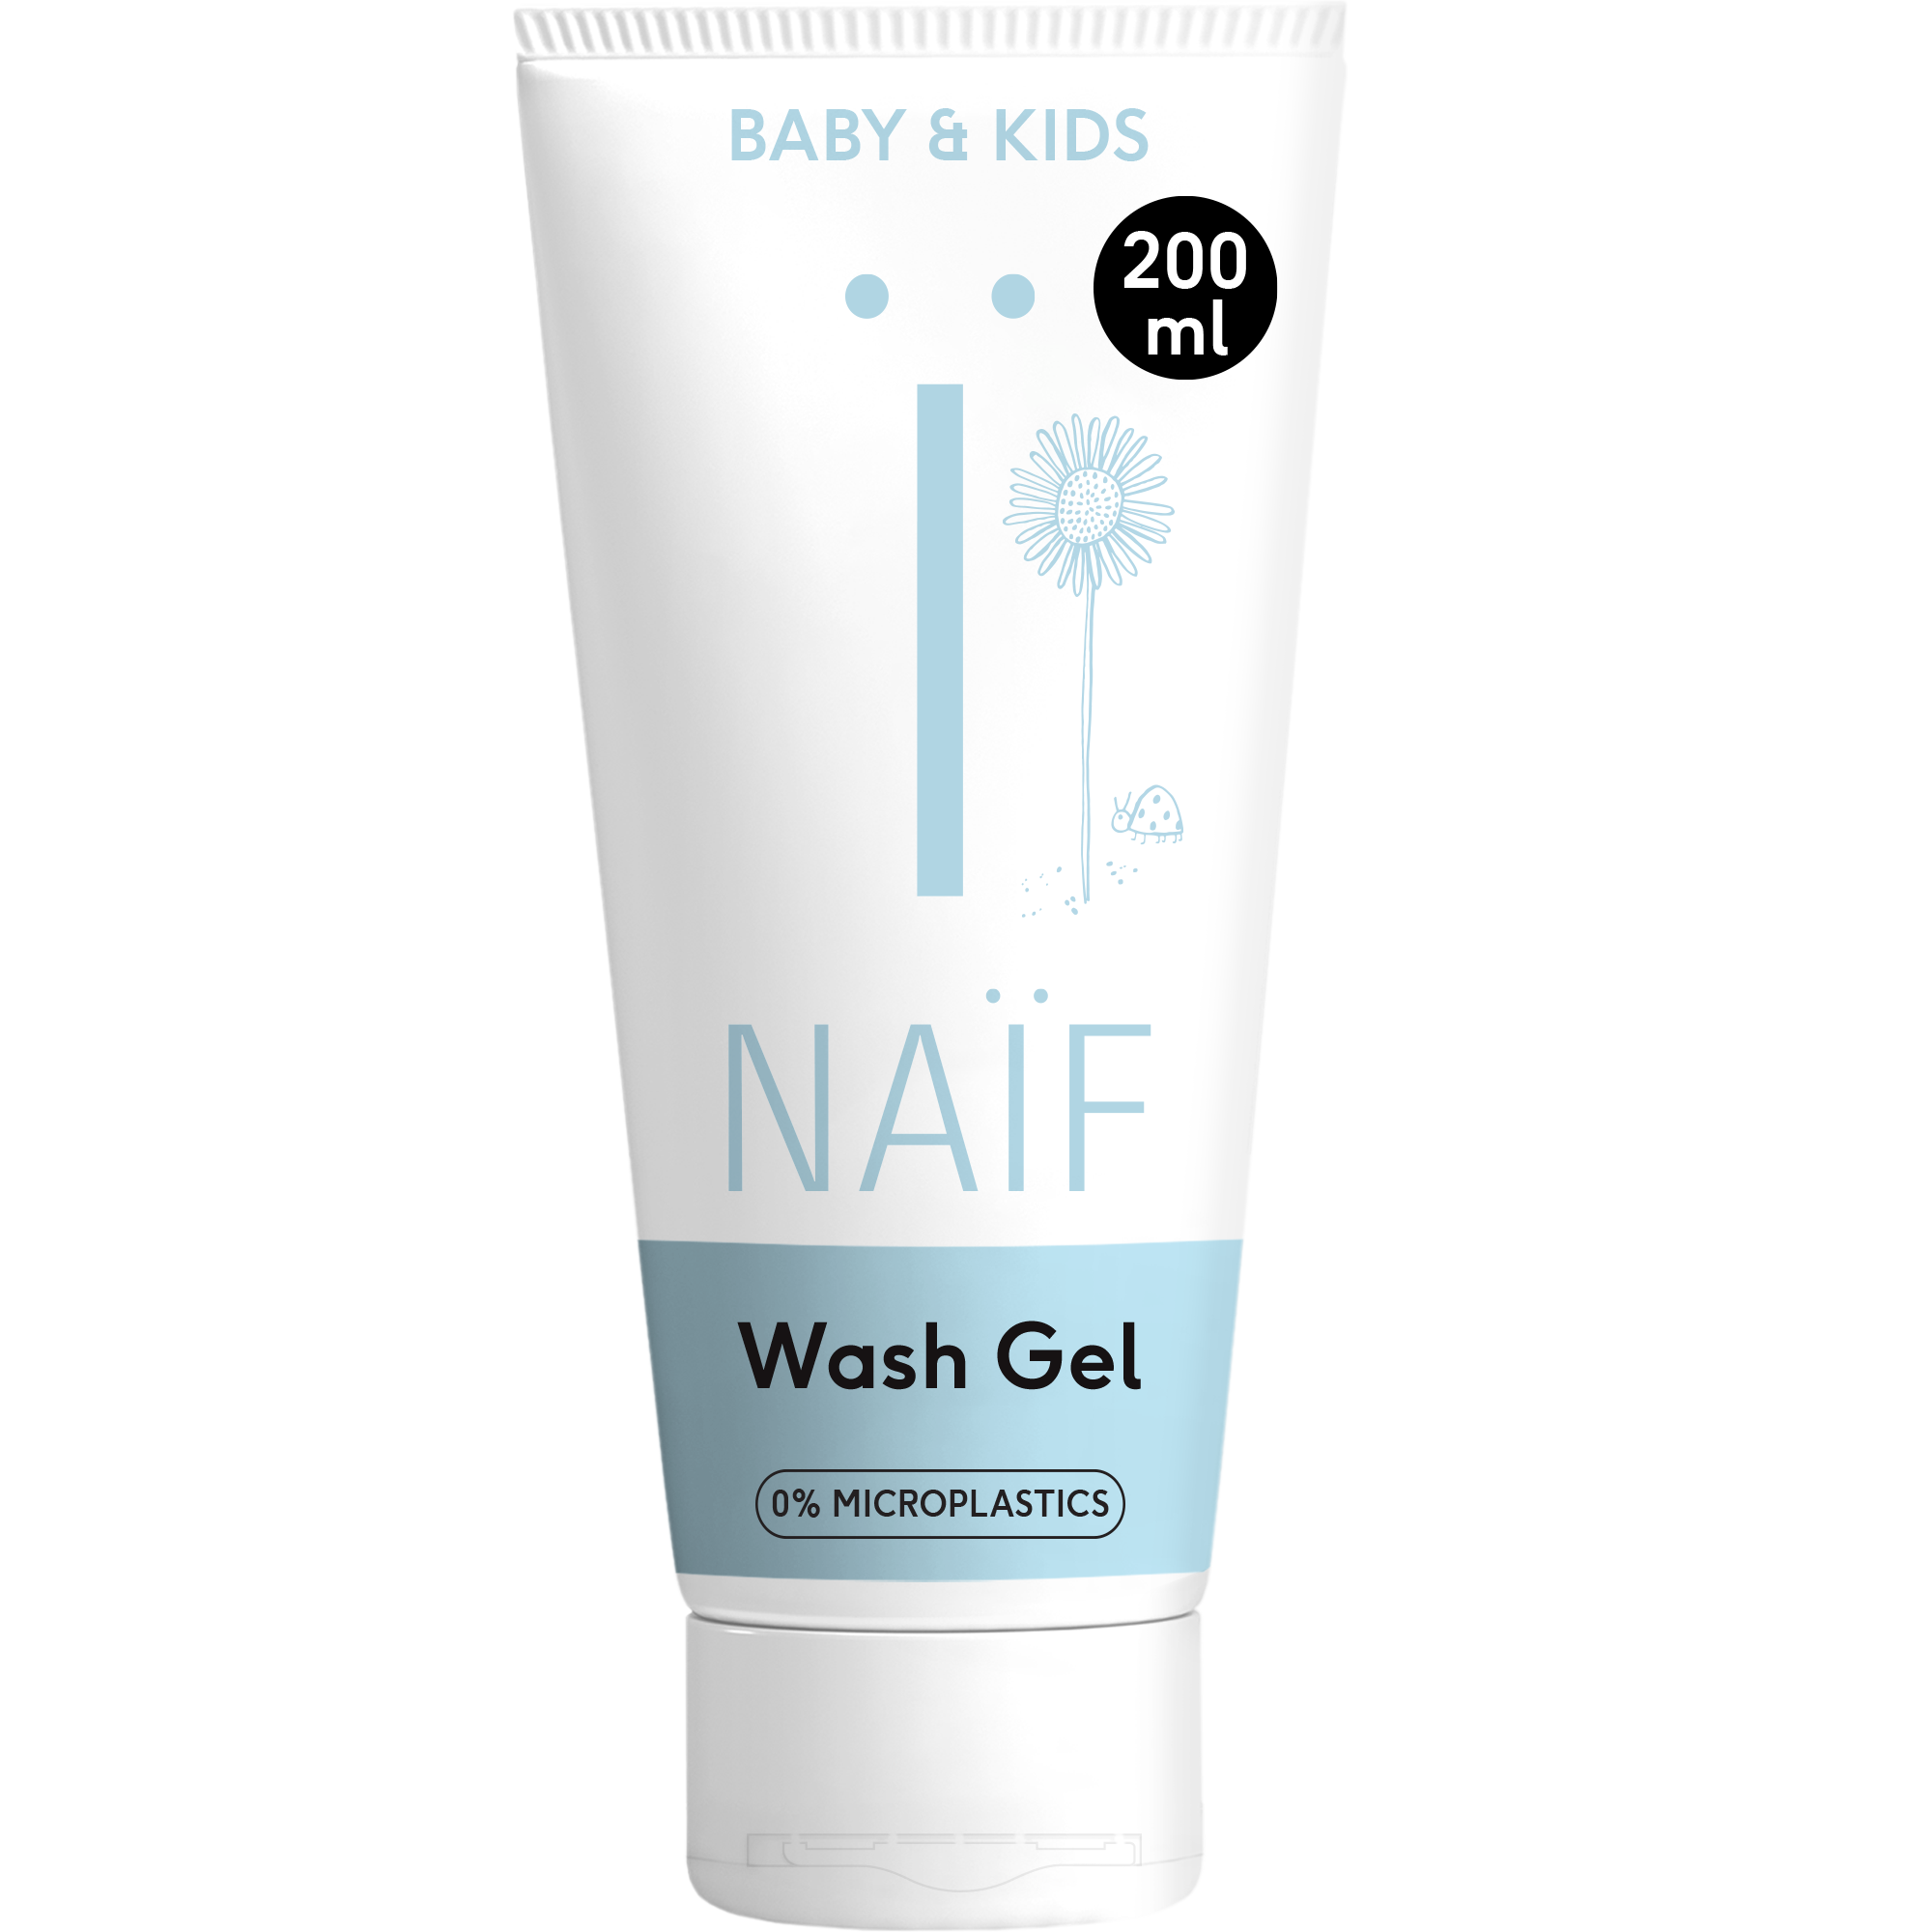 Cleansing Wash Gel for Baby & Kids